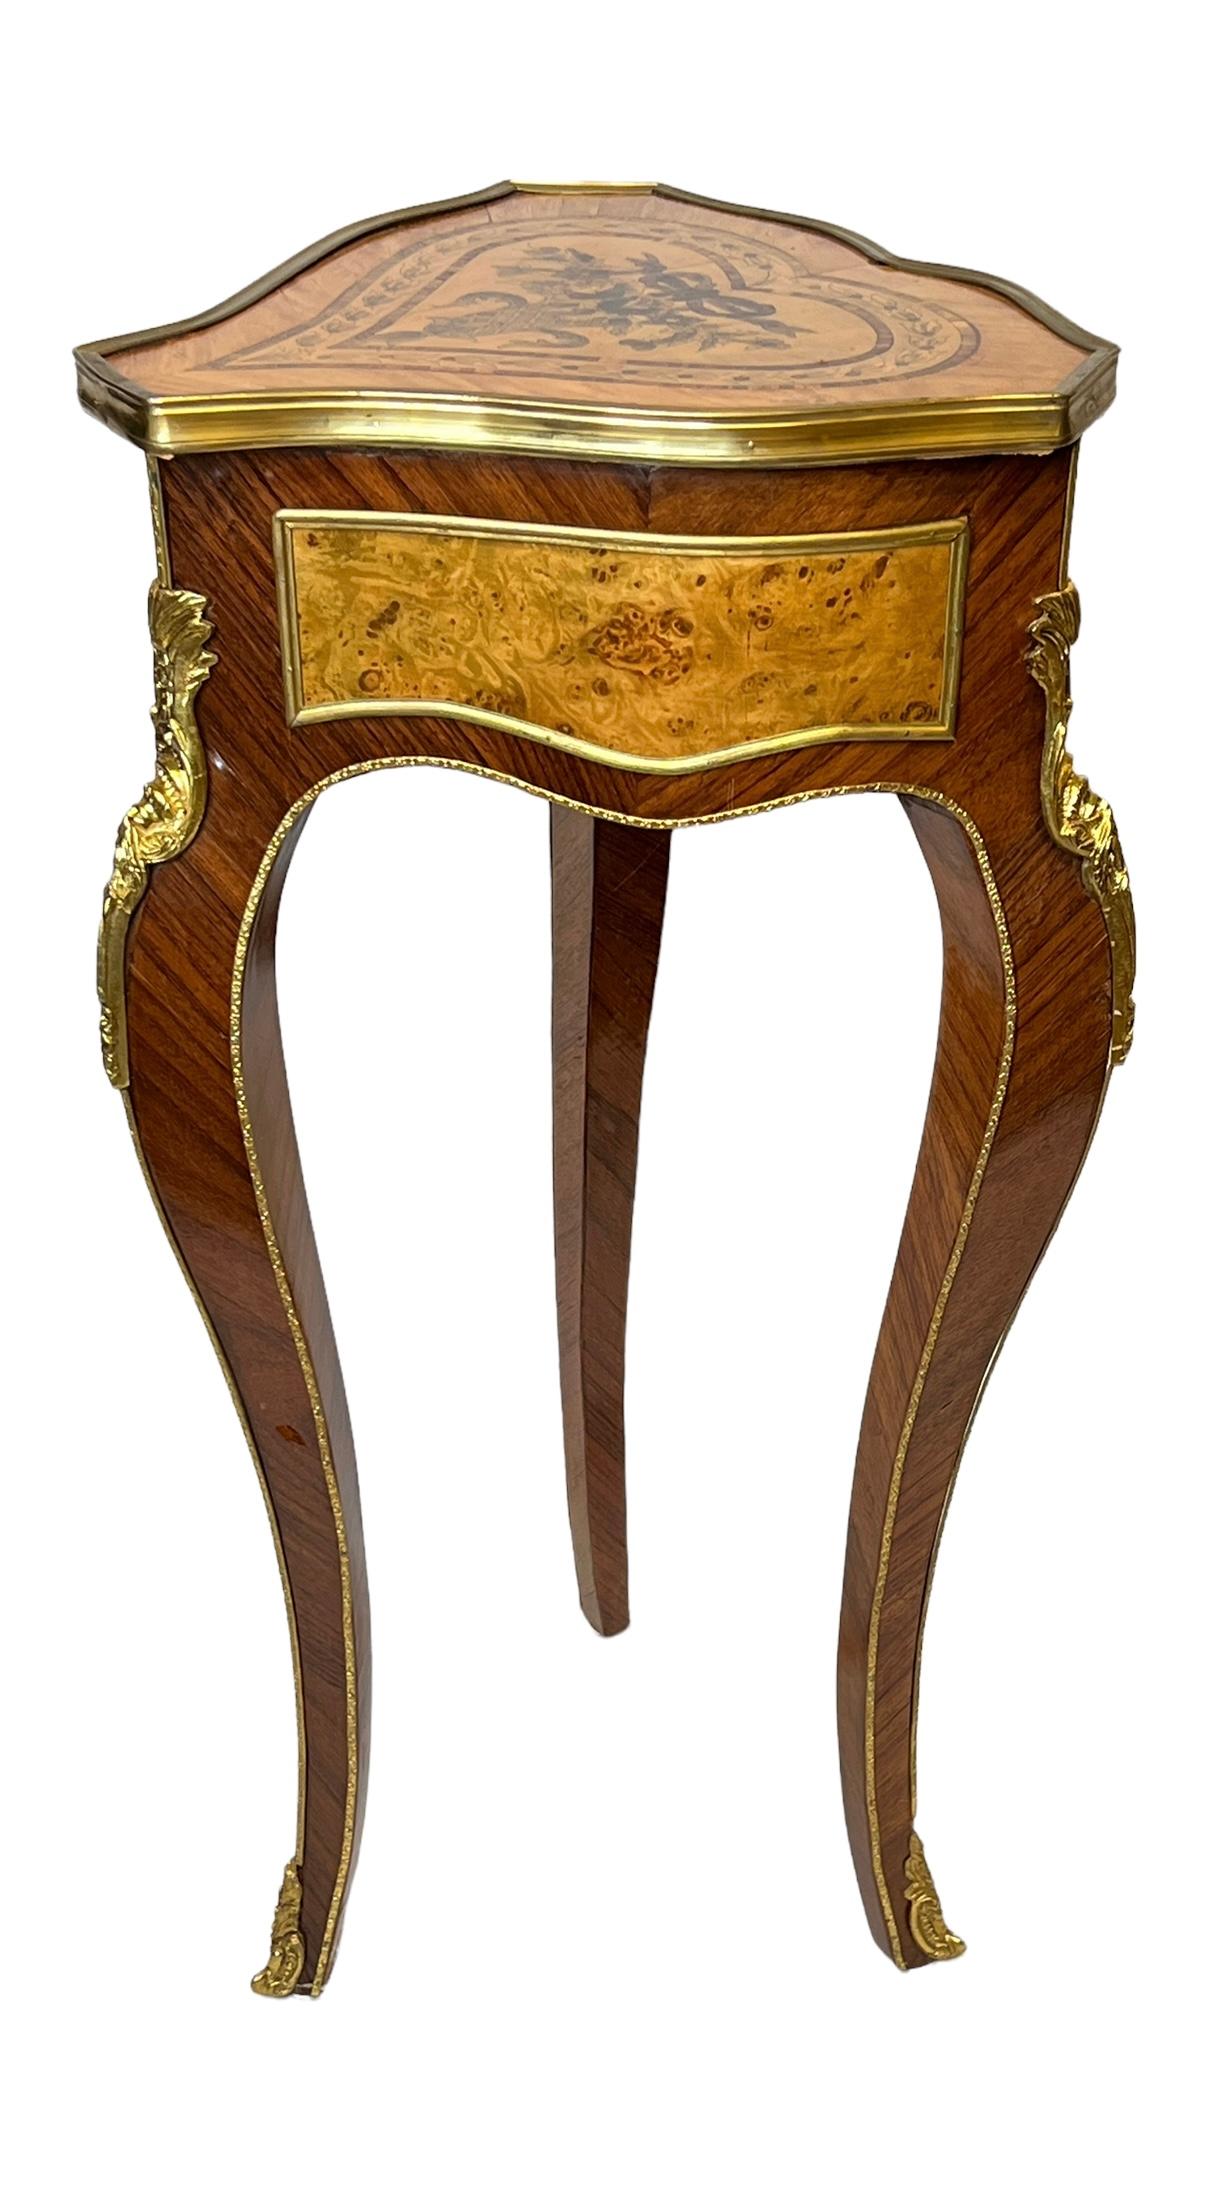 20th Century Louis XV Style Marquetry Inlaid Fruitwood Tripod Side Table For Sale